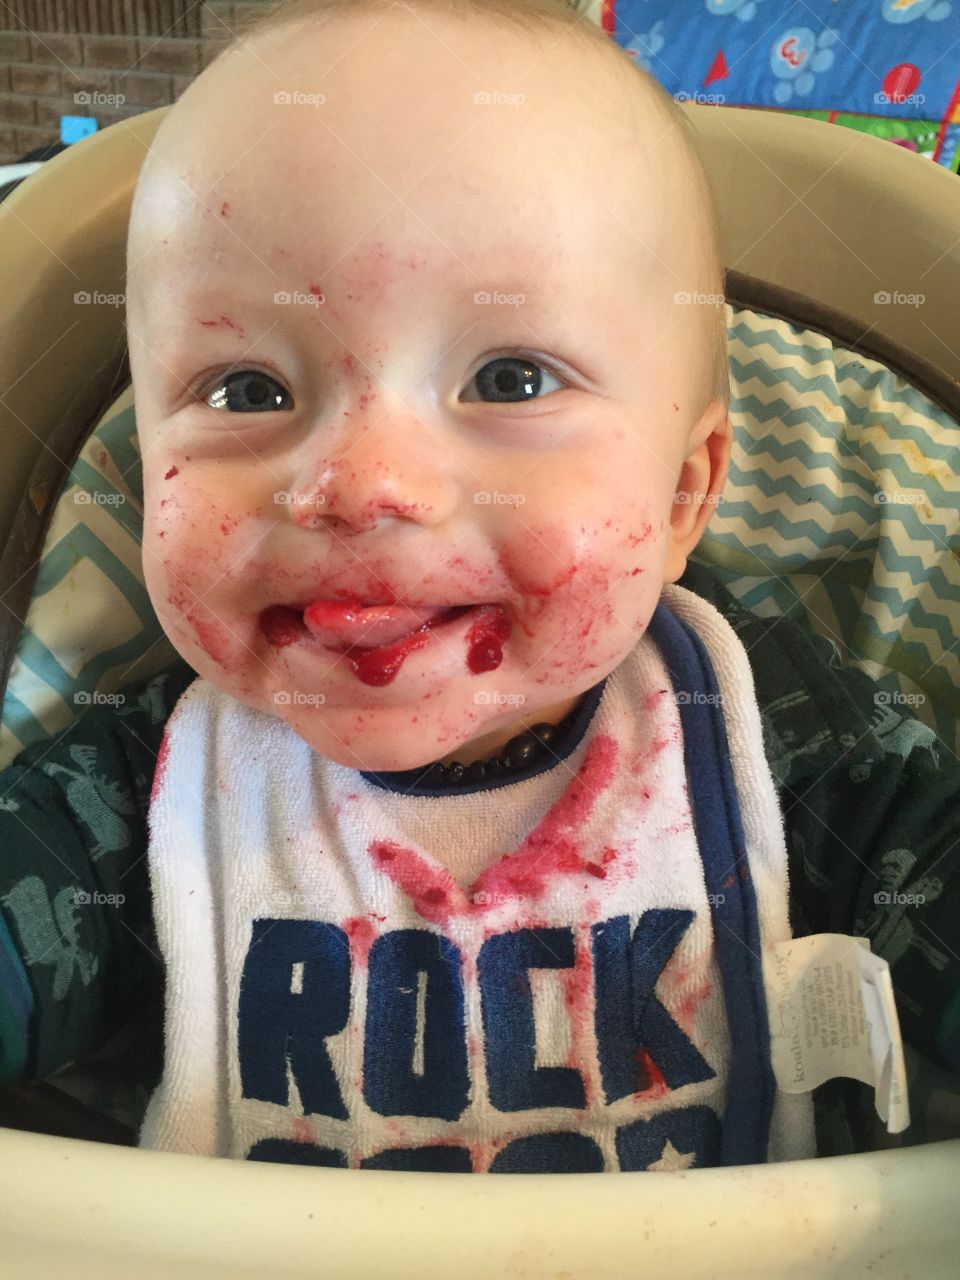 My beautiful son eating his cooked beets and blueberries and loving it!! He absolutely loves his solids and beets are his favorite. Cutie pie giving mom a cute tongue smile.